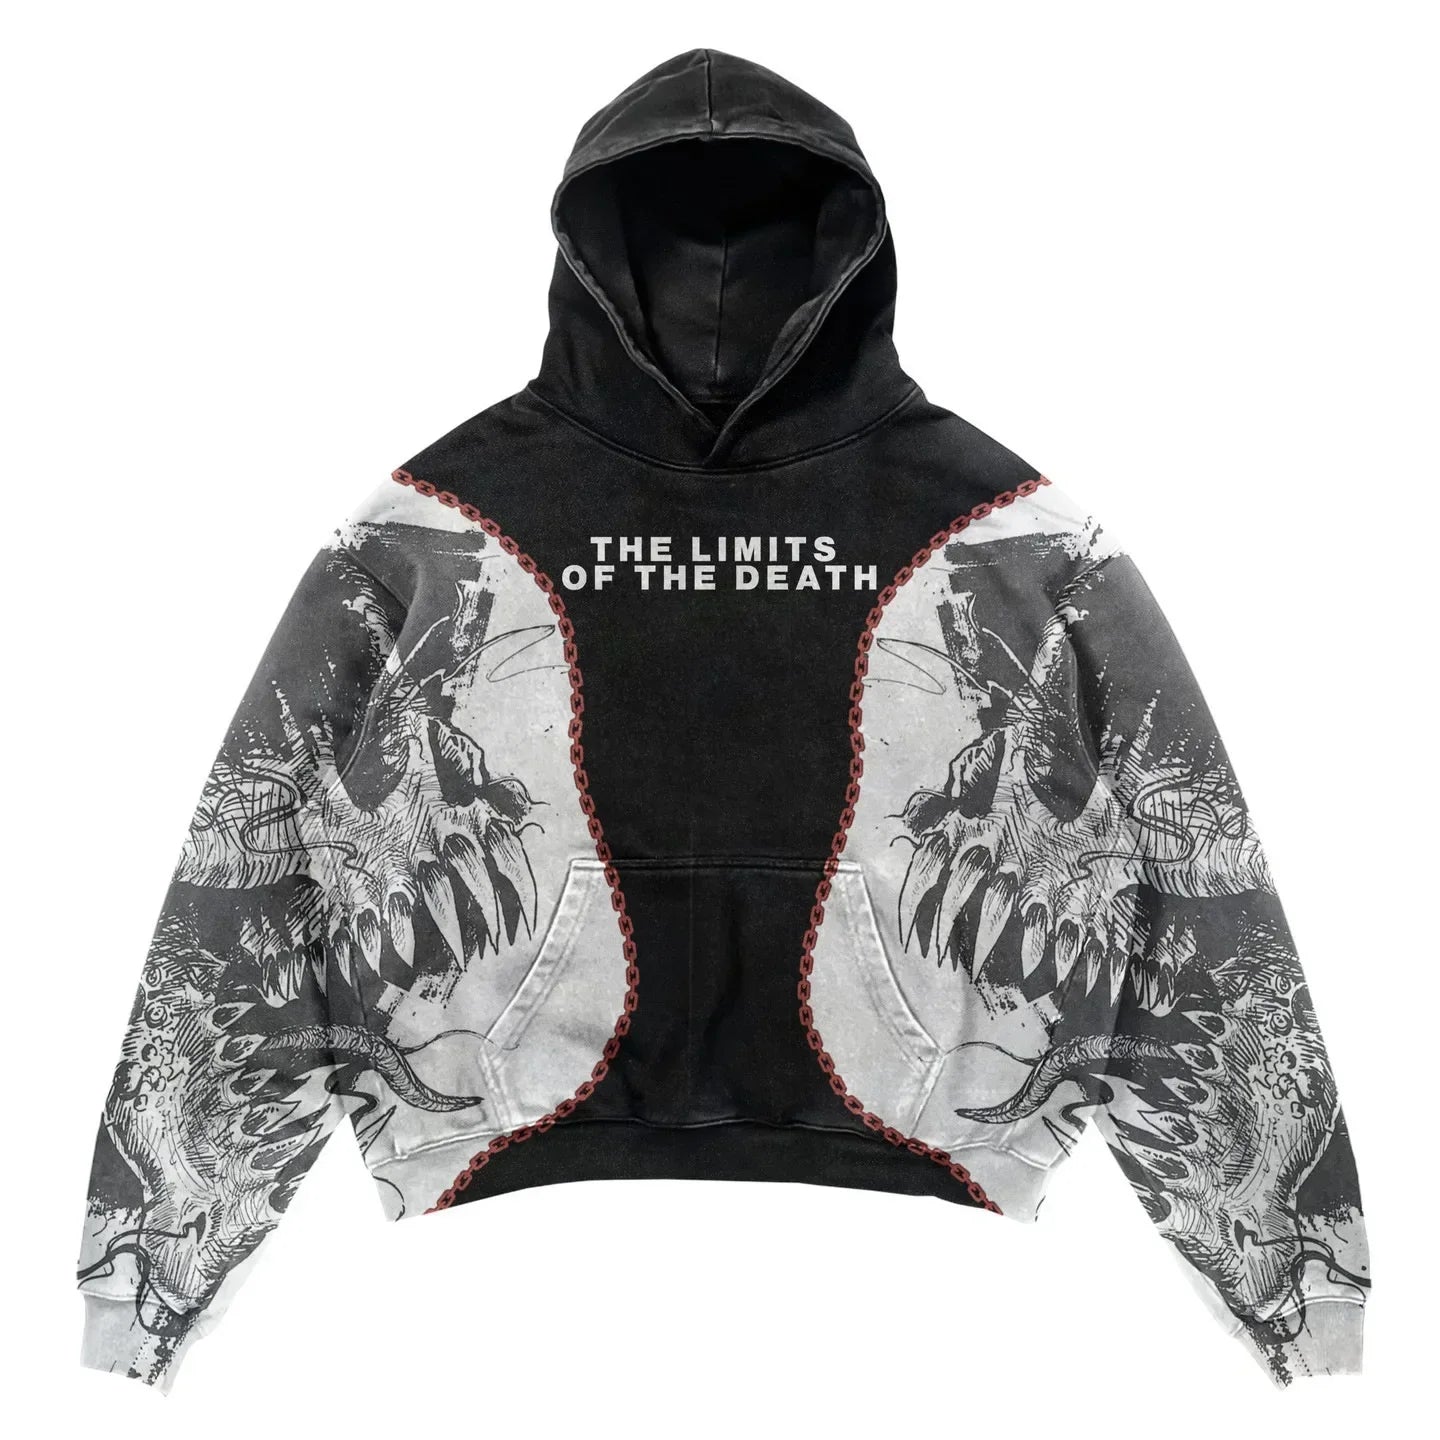 A Maramalive™ Explosions Printed Skull Y2K Retro Hooded Sweater Coat Street Style Gothic Casual Fashion Hooded Sweater Men's Female with the text "THE LIMITS OF THE DEATH" and a detailed, graphic design featuring skeletal and monstrous elements on the front and sleeves. Made from durable polyester for a lasting edge.